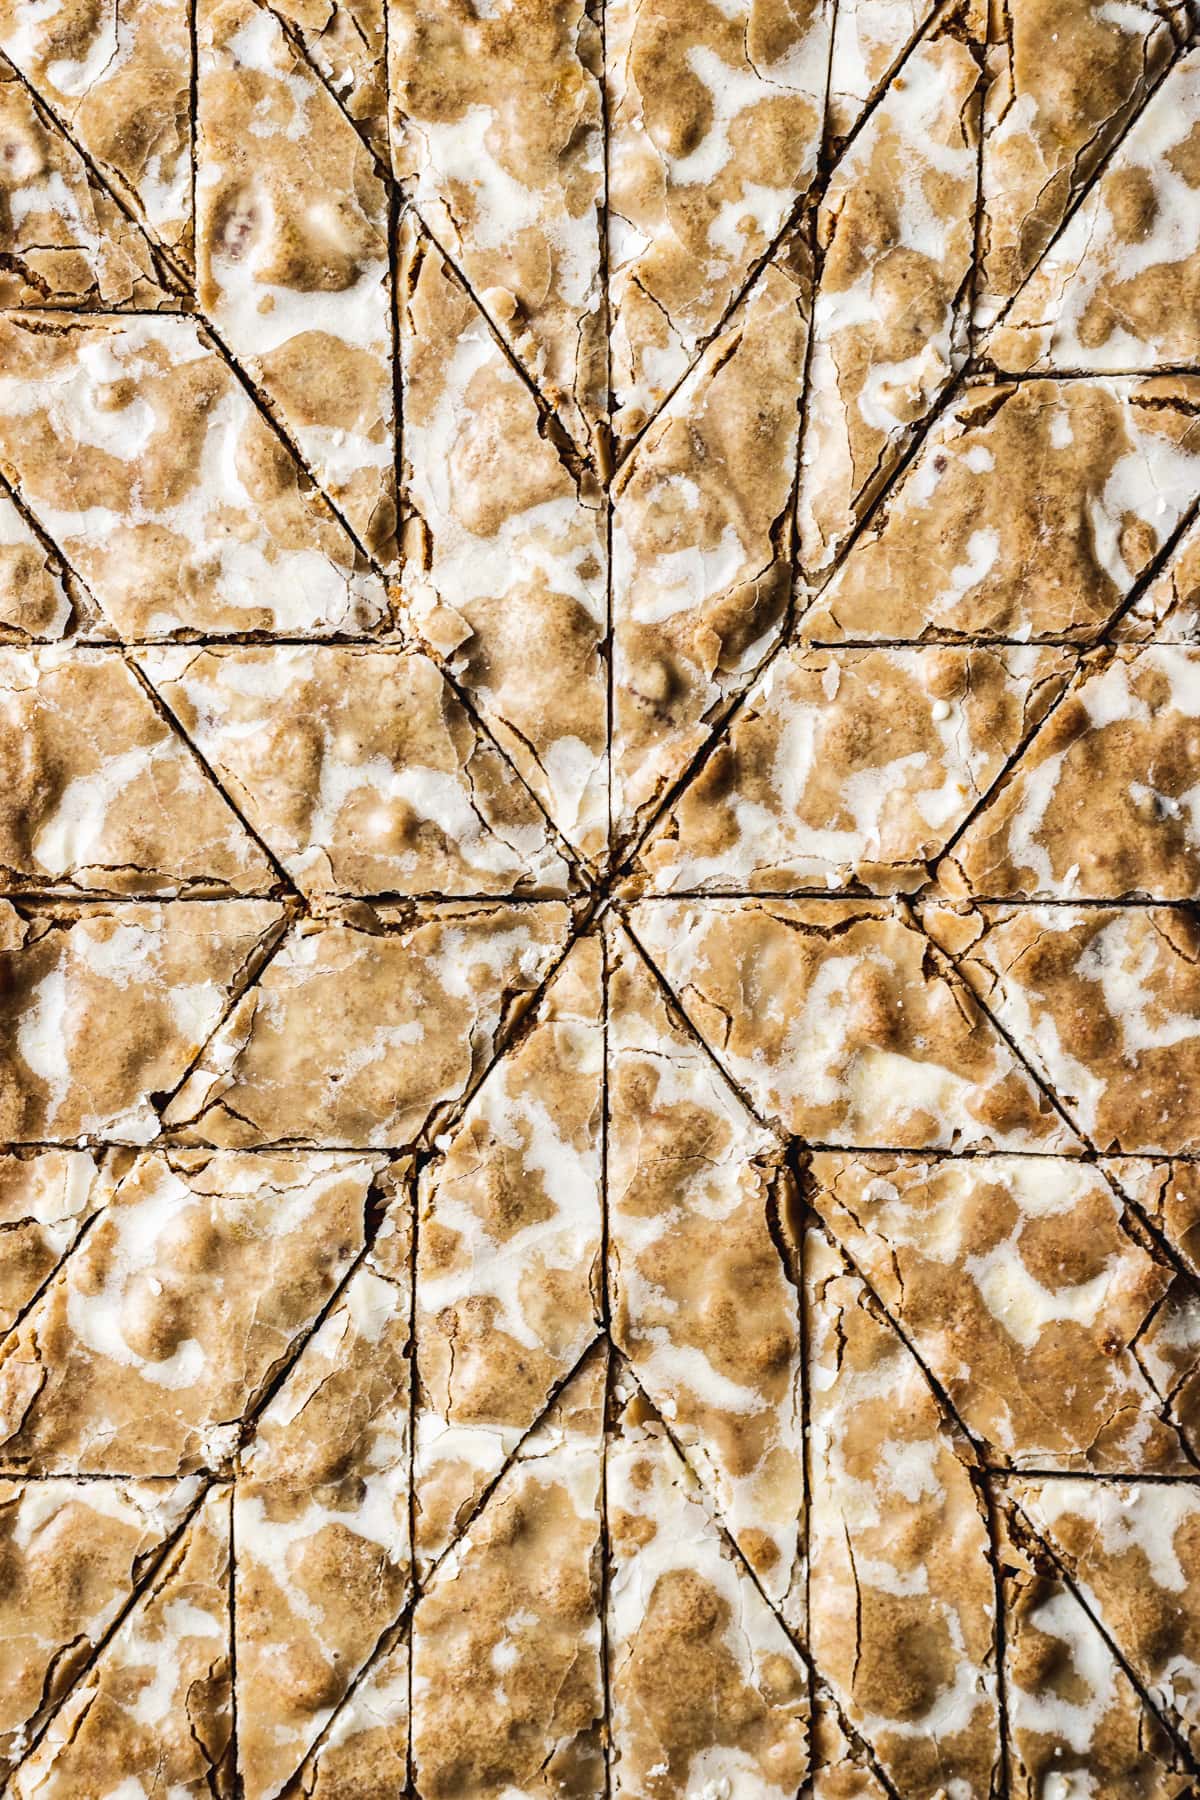 A closeup of spiced and glazed bar cookies cut into a decorative holiday star pattern.